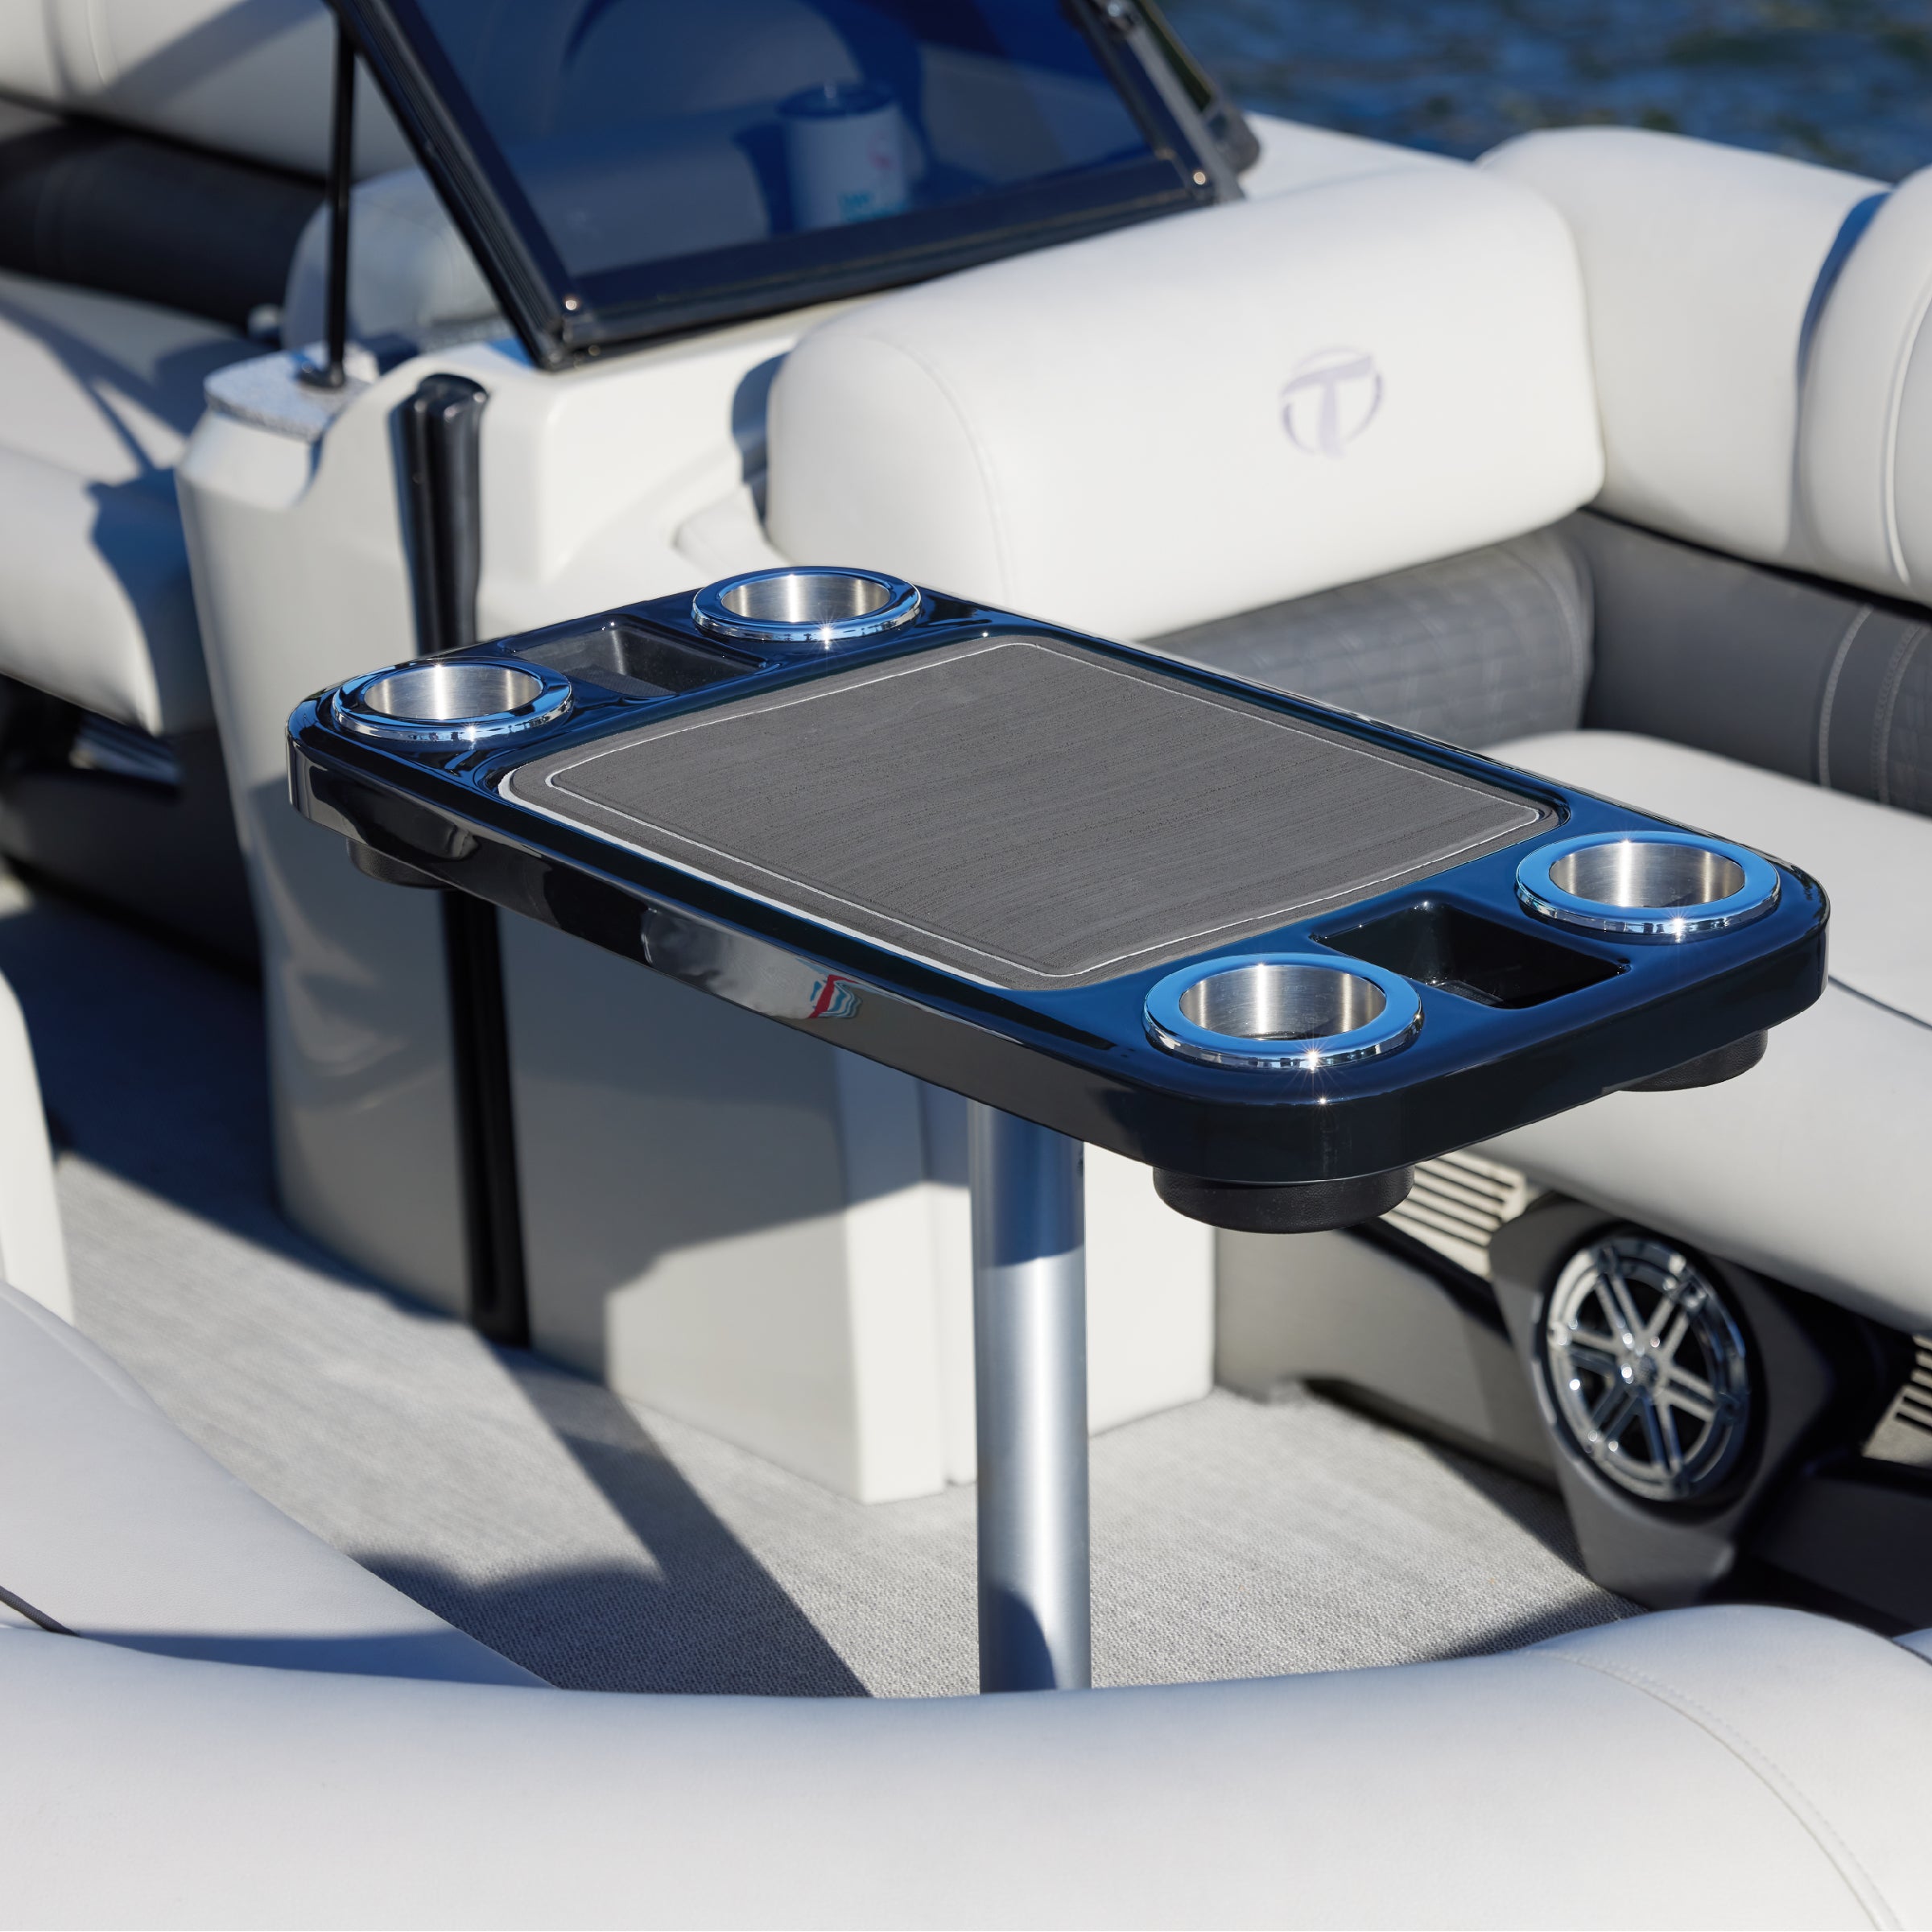 Glossy Black - Non-lit Party Boat Table Systems w/ Center Foam Mat | ITC Shop Now